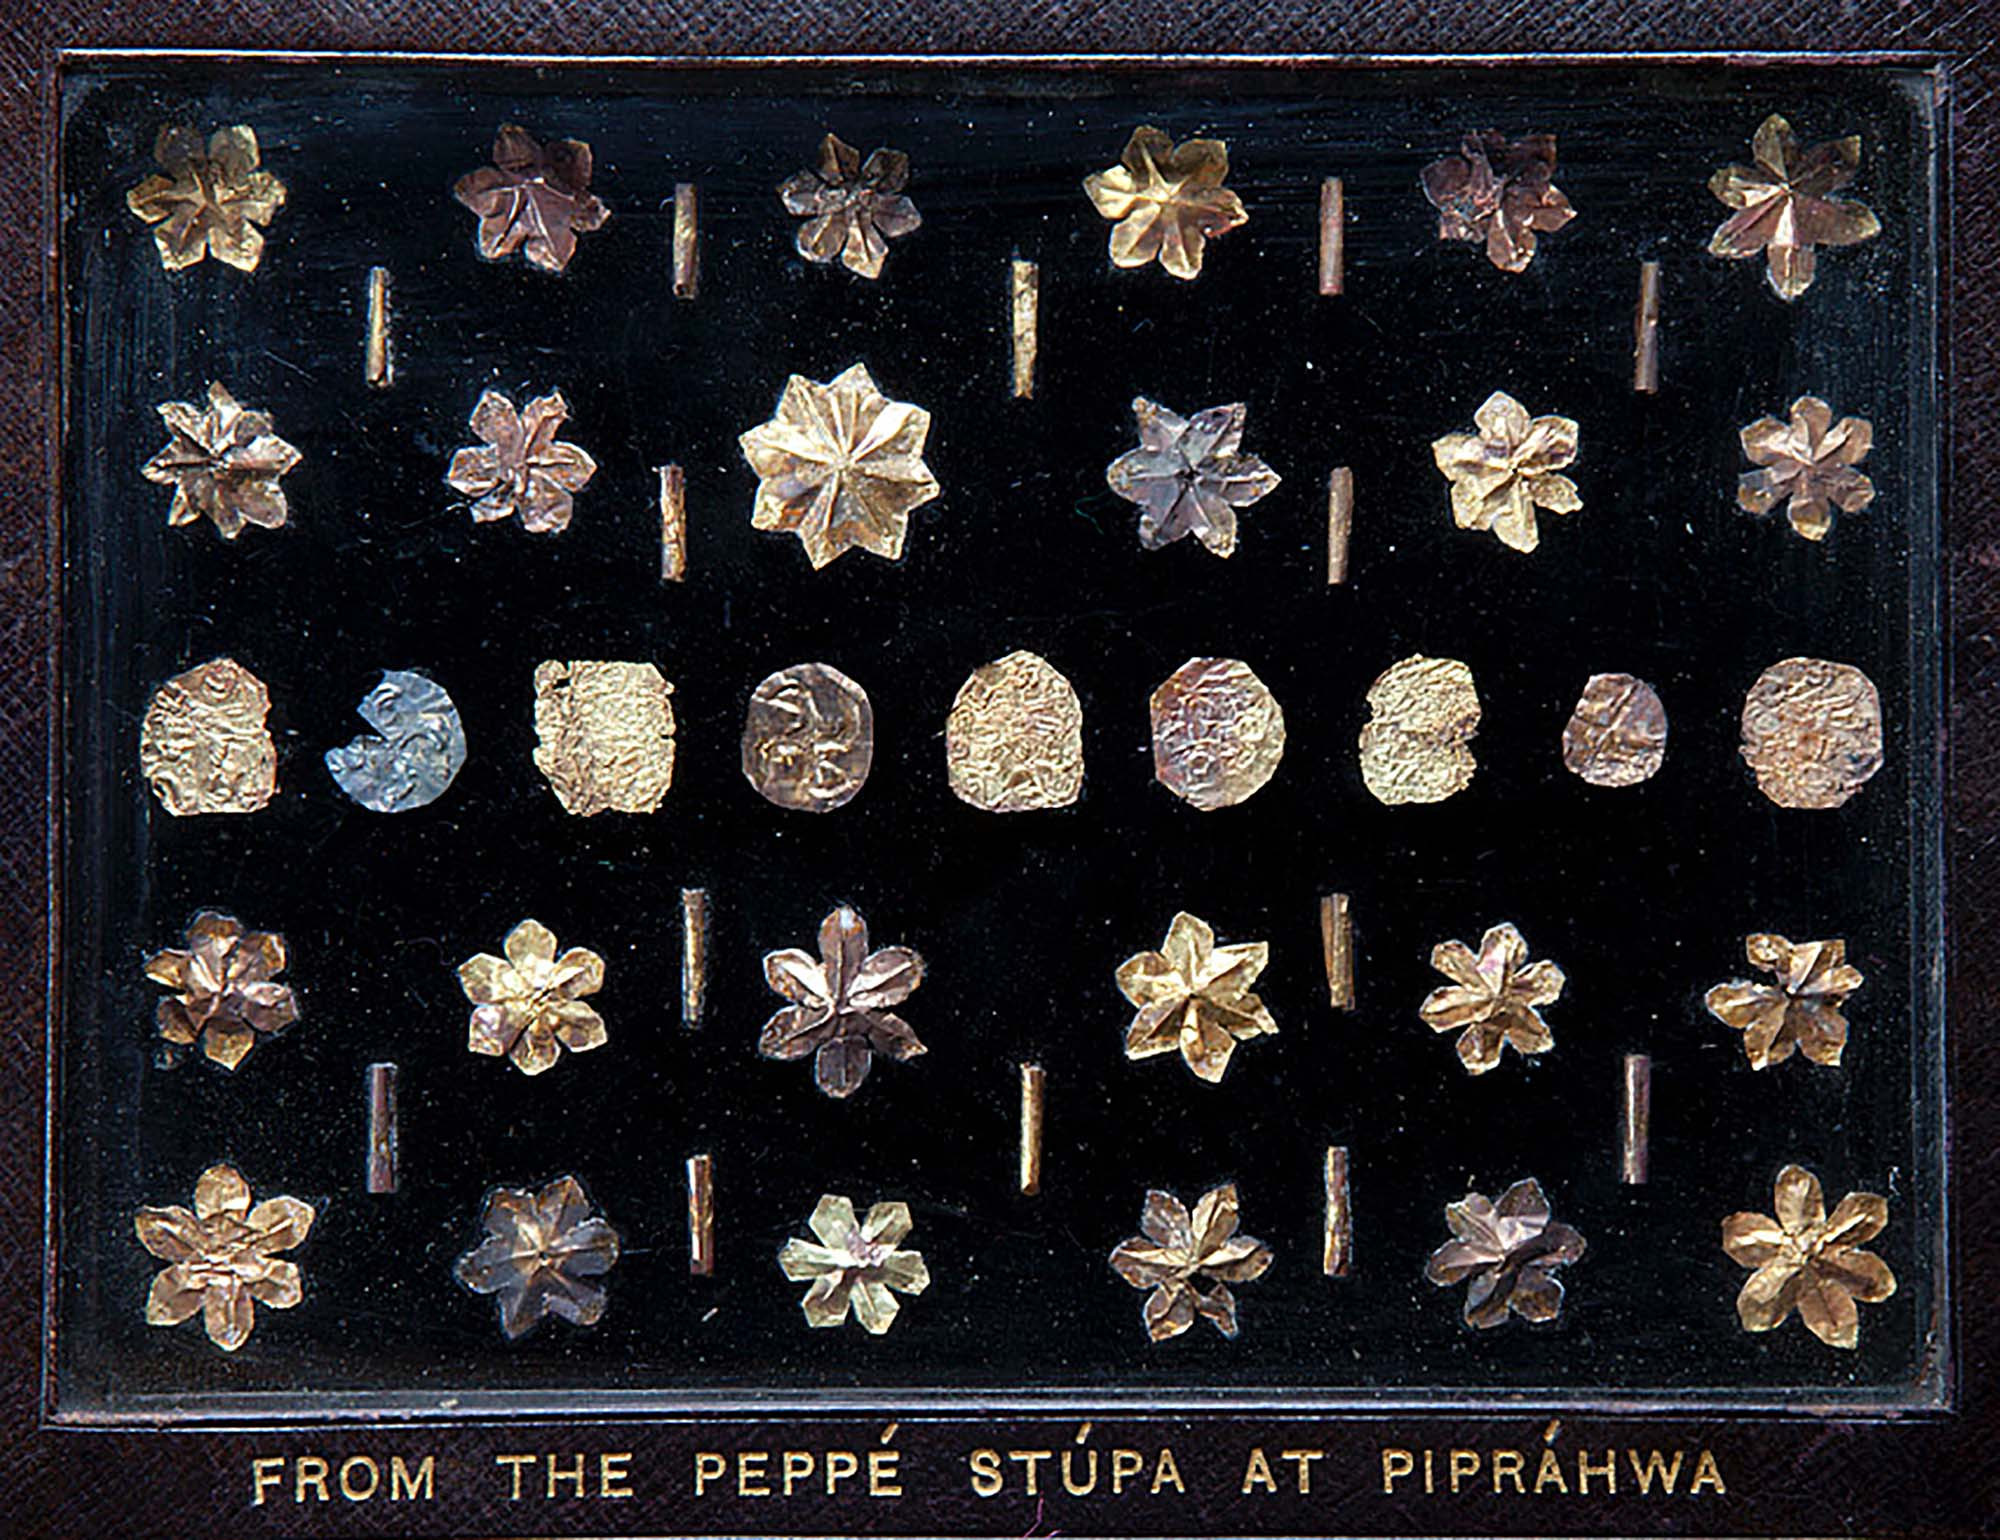 Gemstones, Secondary relics from the Piprahwa stupa
